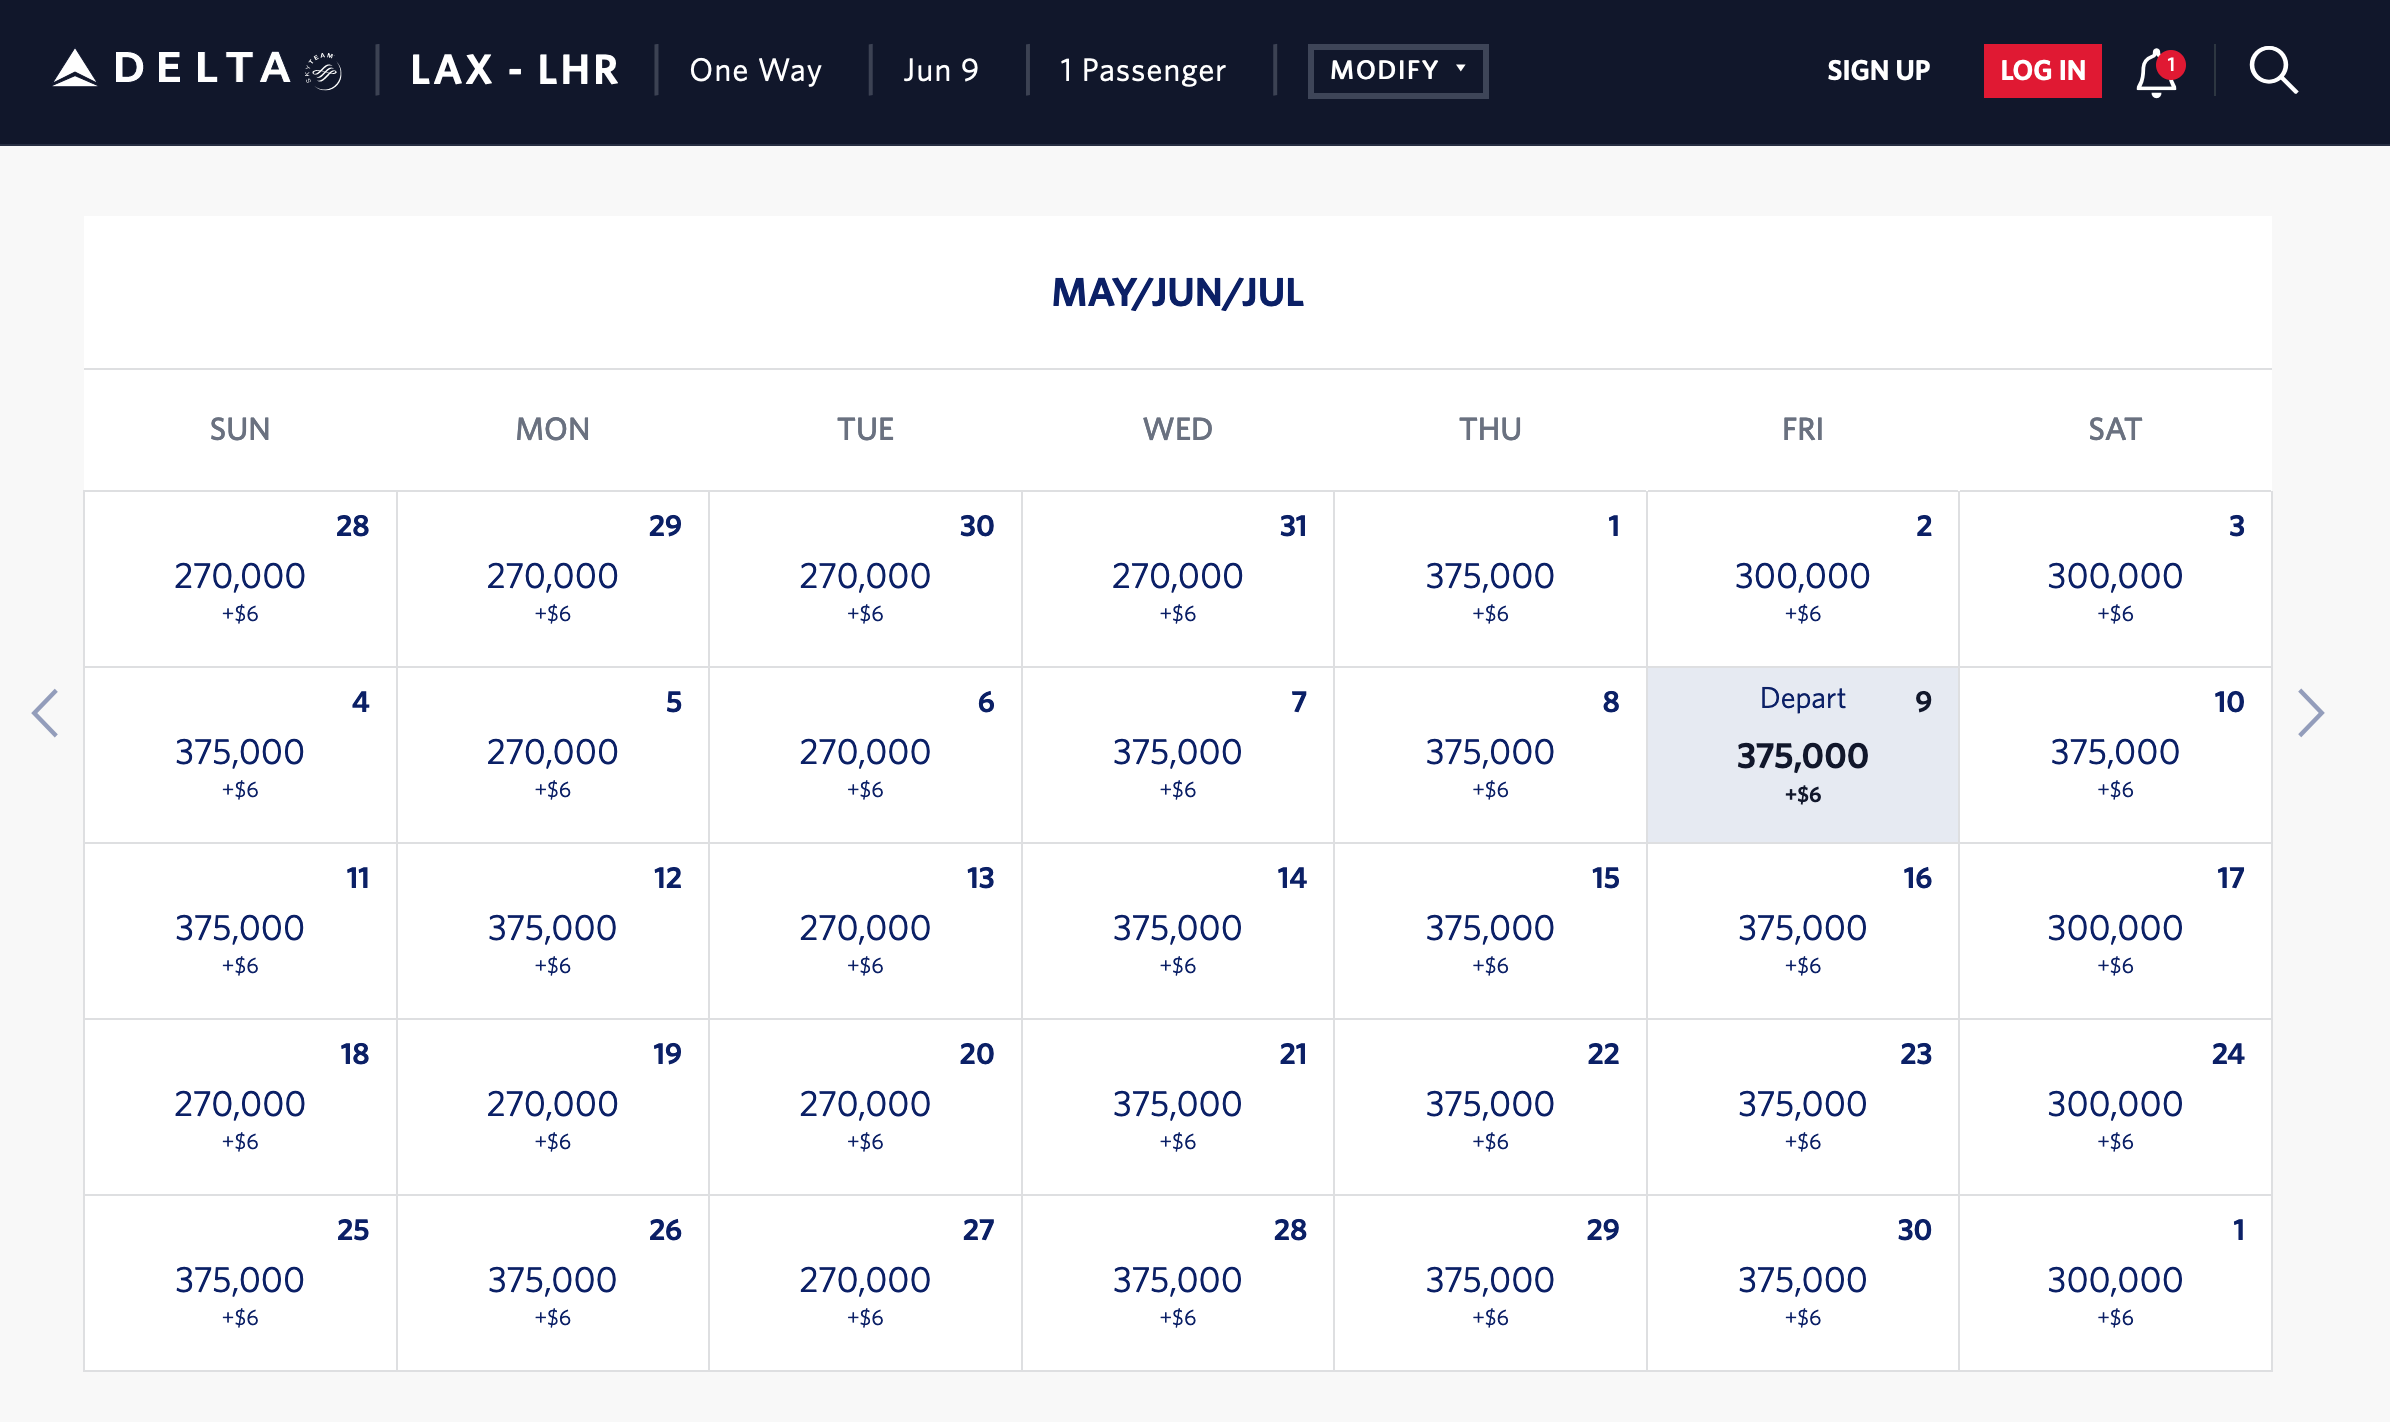 Delta business-class award prices between Los Angeles and London